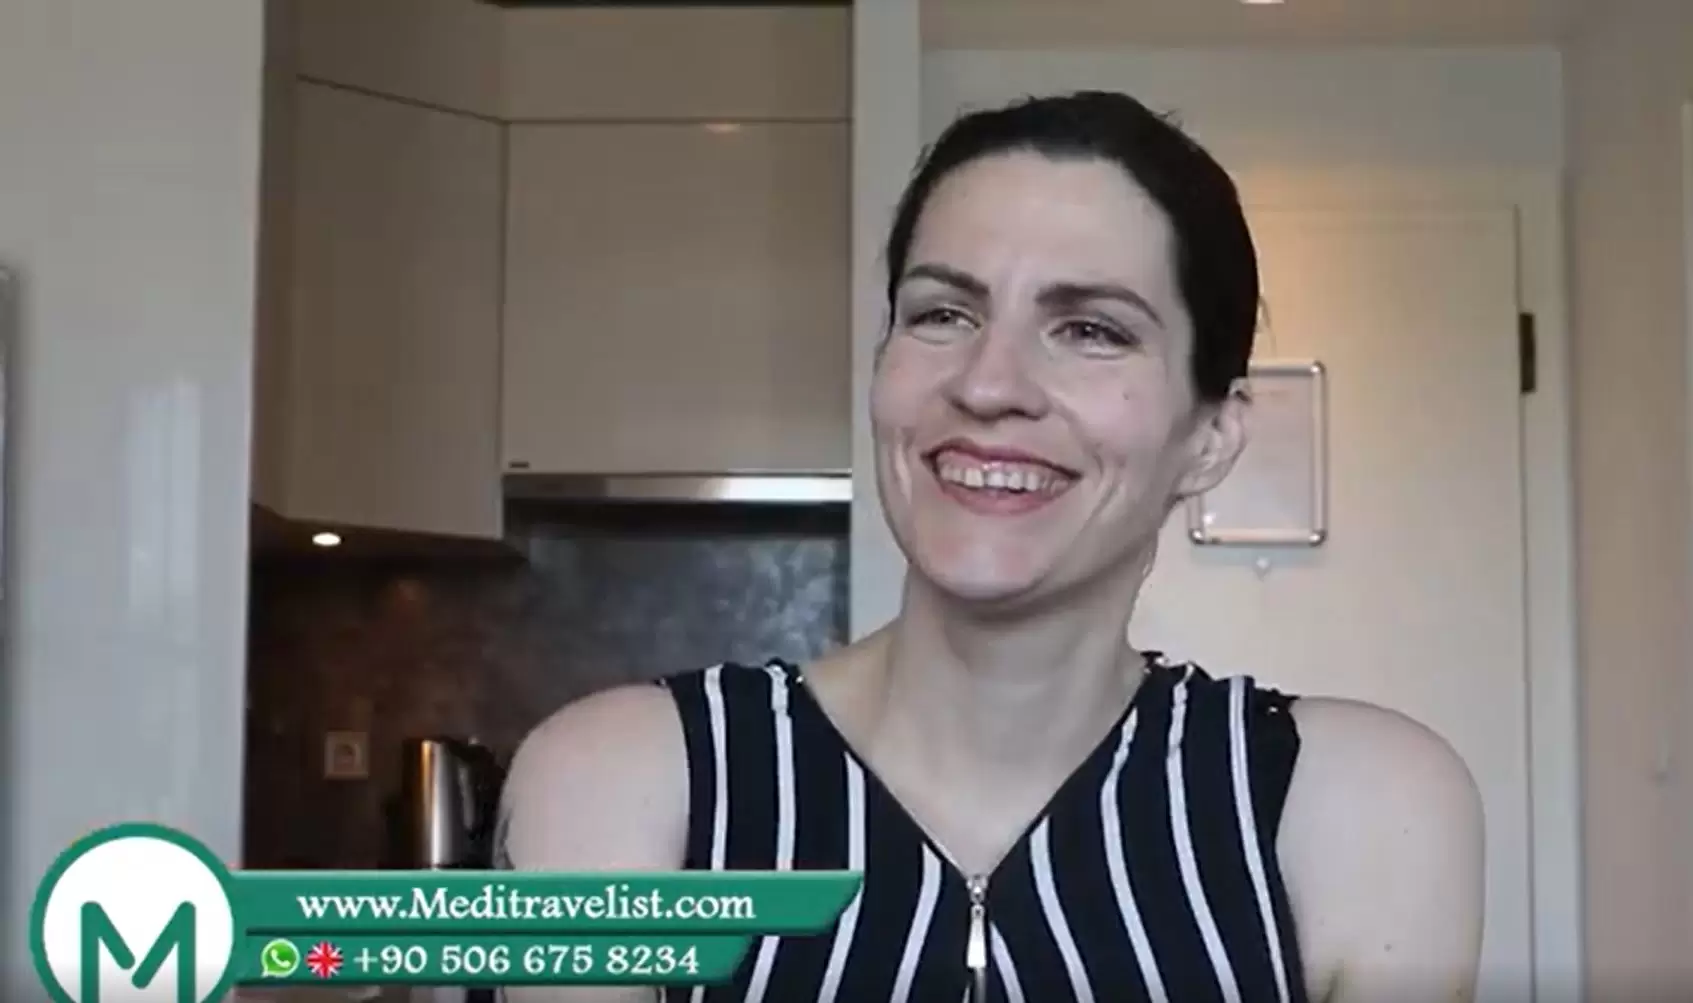 AFTER AESTHETIC SURGERY - Her experience about MediTravelist Services